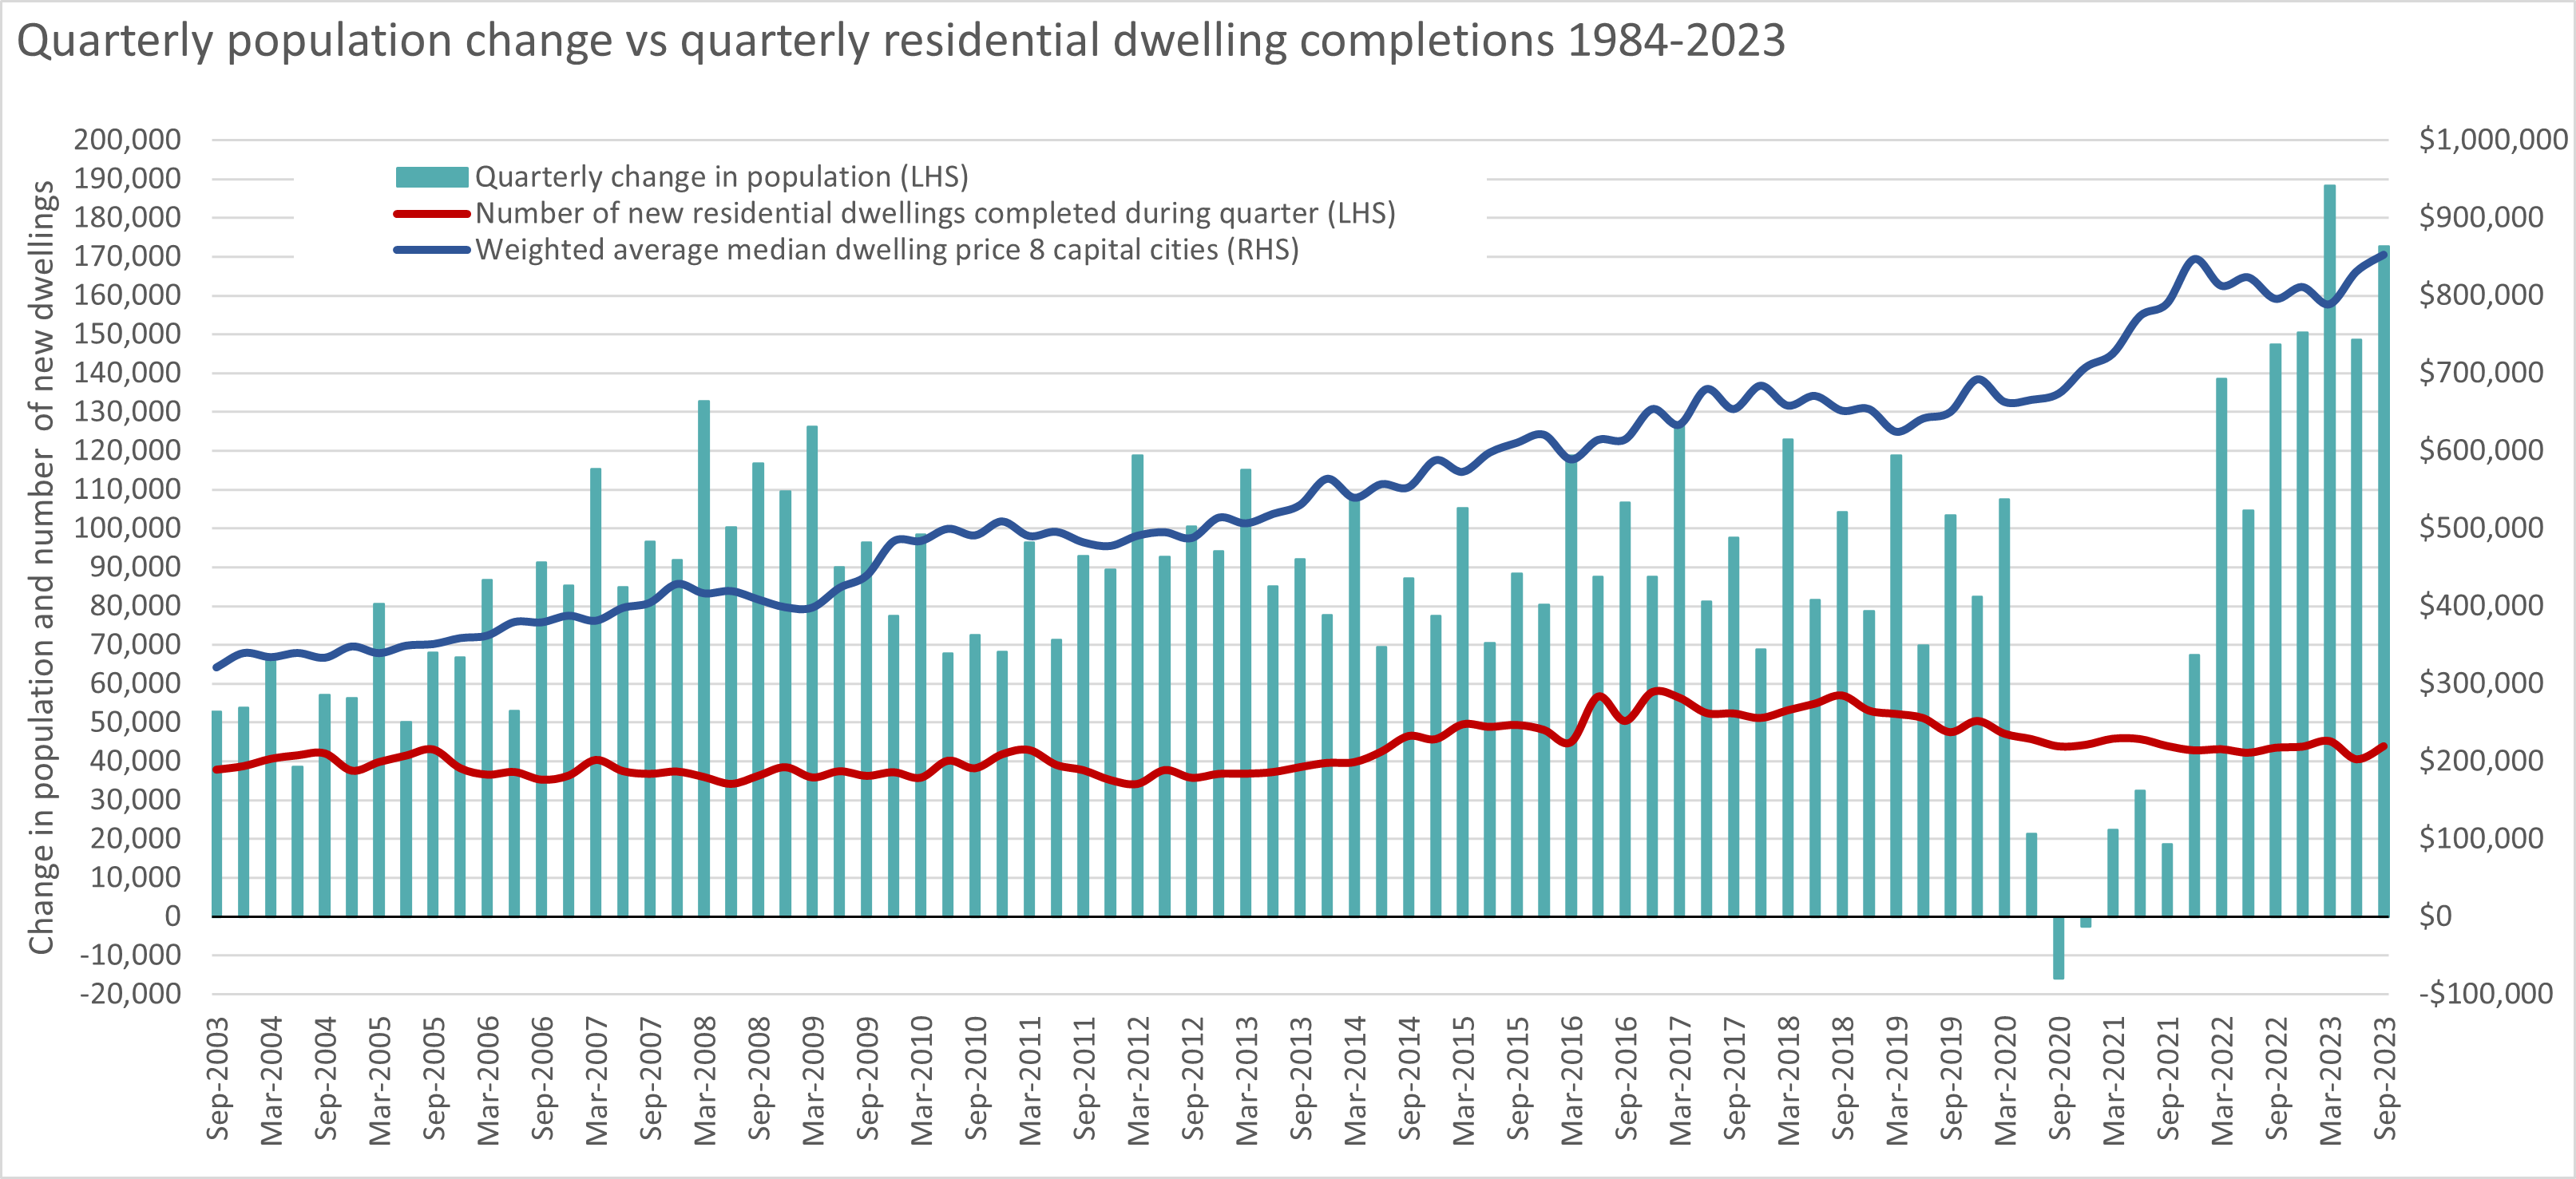 ABS Quarterly population change vs residential dwelling completions. April 2024